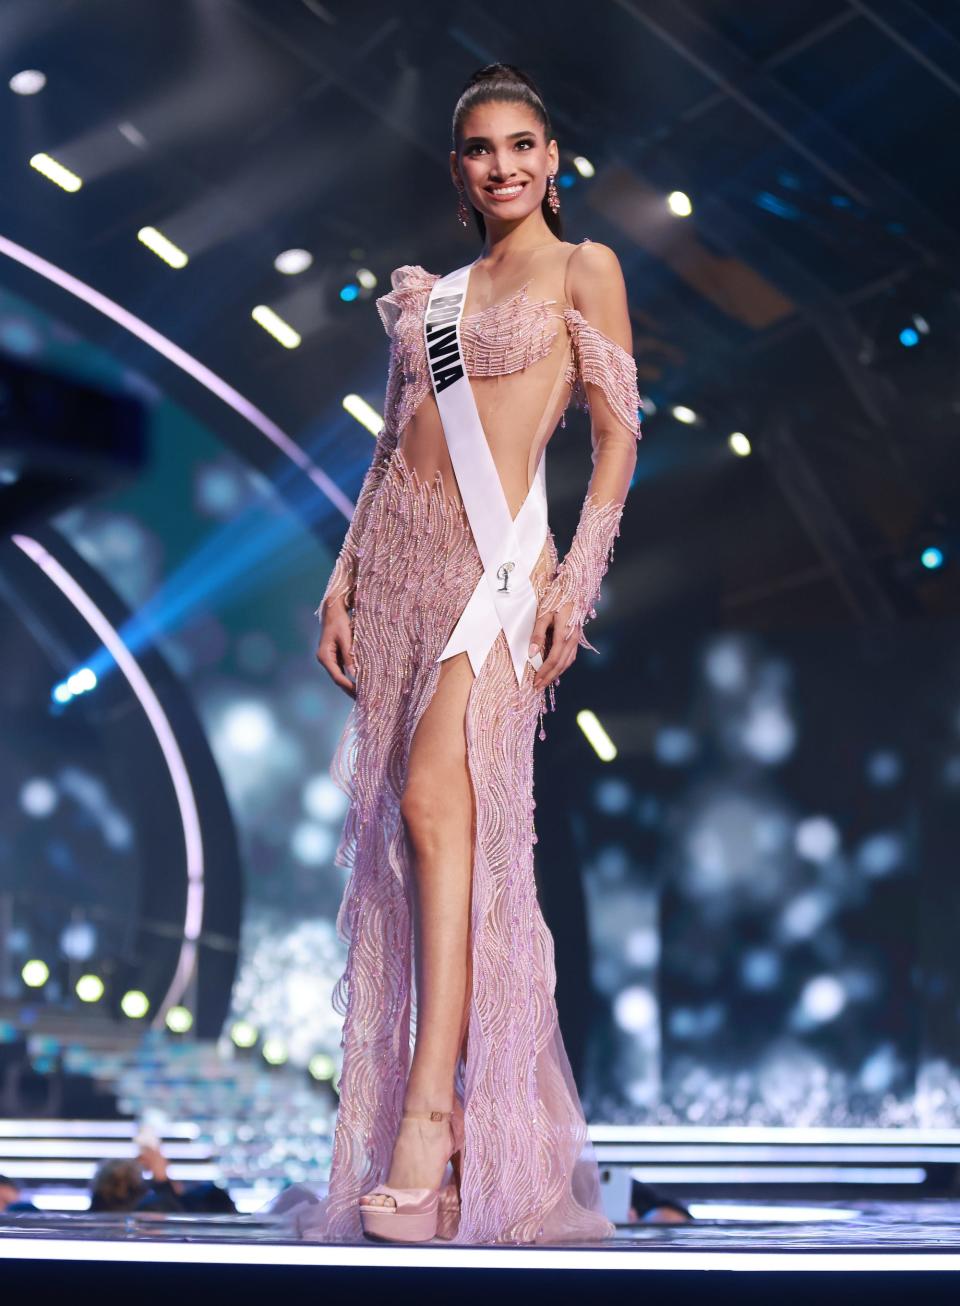 Miss Bolivia poses in an evening gown at the 2021 Miss Universe competition.